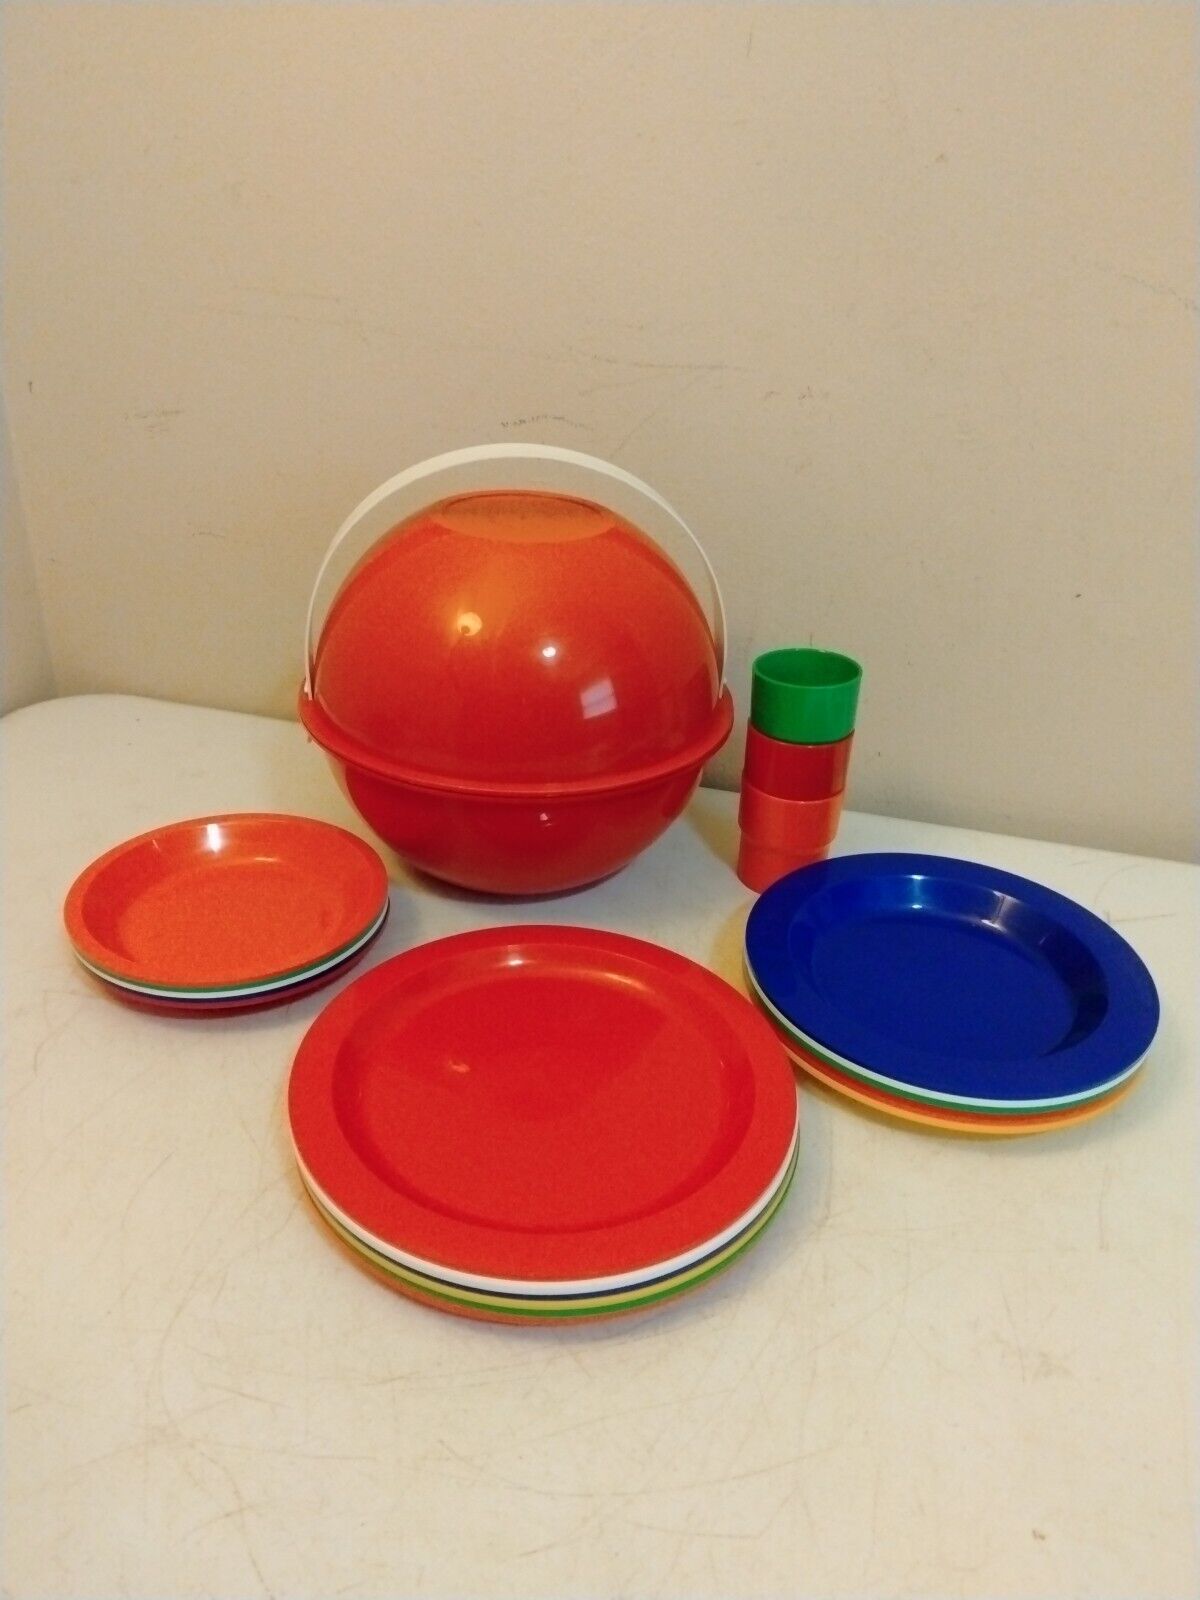 20 PIECE VTG INGRID CHICAGO PARTY BALL RAINBOW PICNIC CAMPING SET PLATES CUPS 